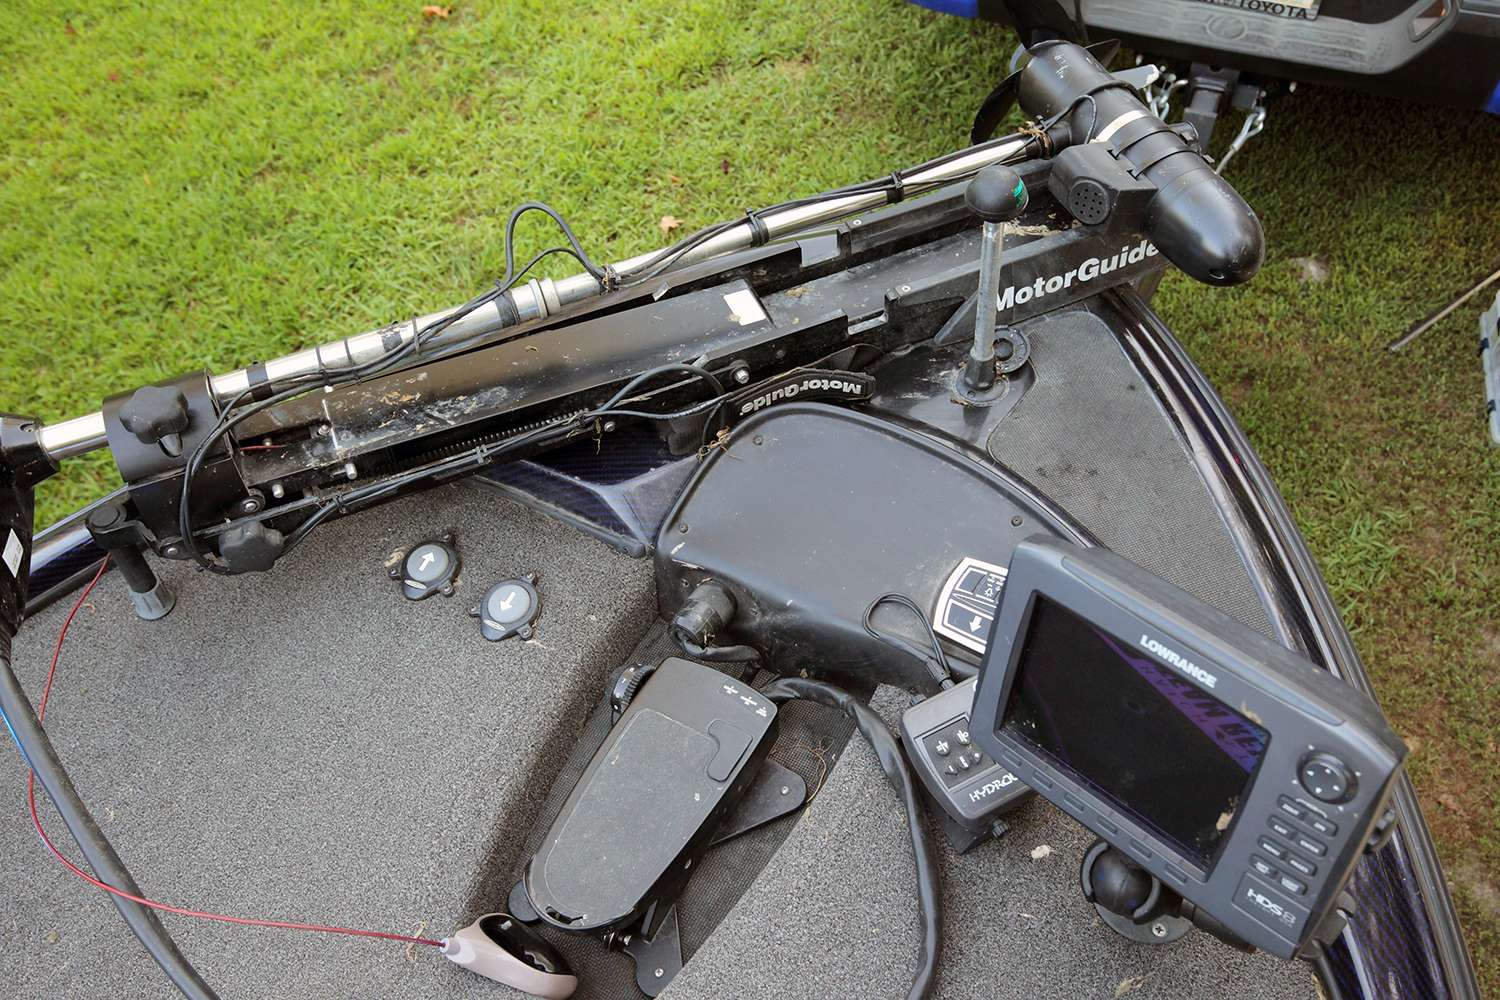 The front of the boat features one Lowrance HDS-8 unit installed using a RAM Mount. The mount's design allows the position of the screen to be adjusted when needed.